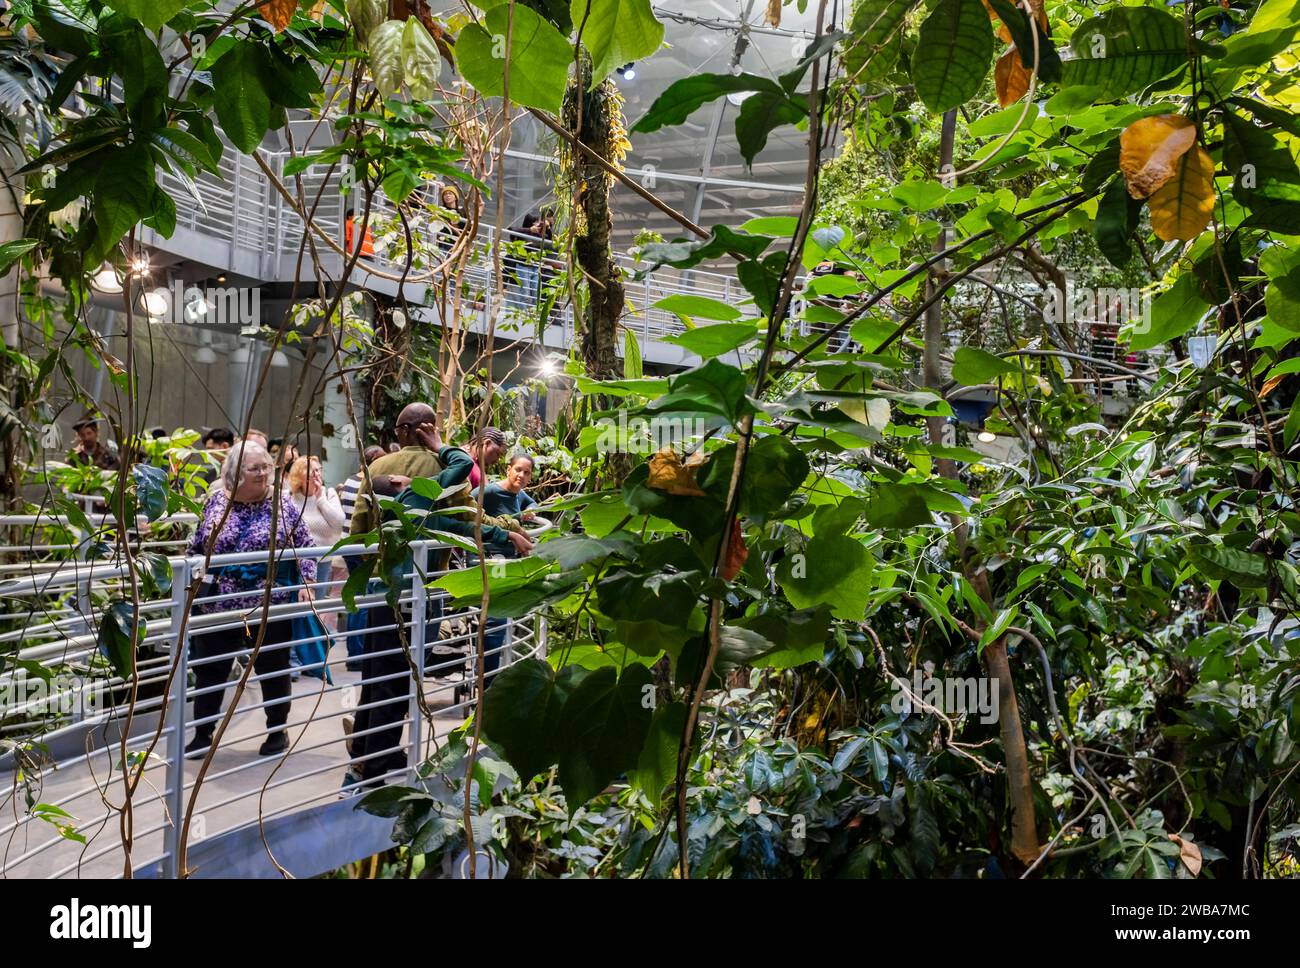 Tourists and locals enjoy the misty and lush rainforest exhibit at the California Academy of Sciences in San Francisco, California Stock Photo